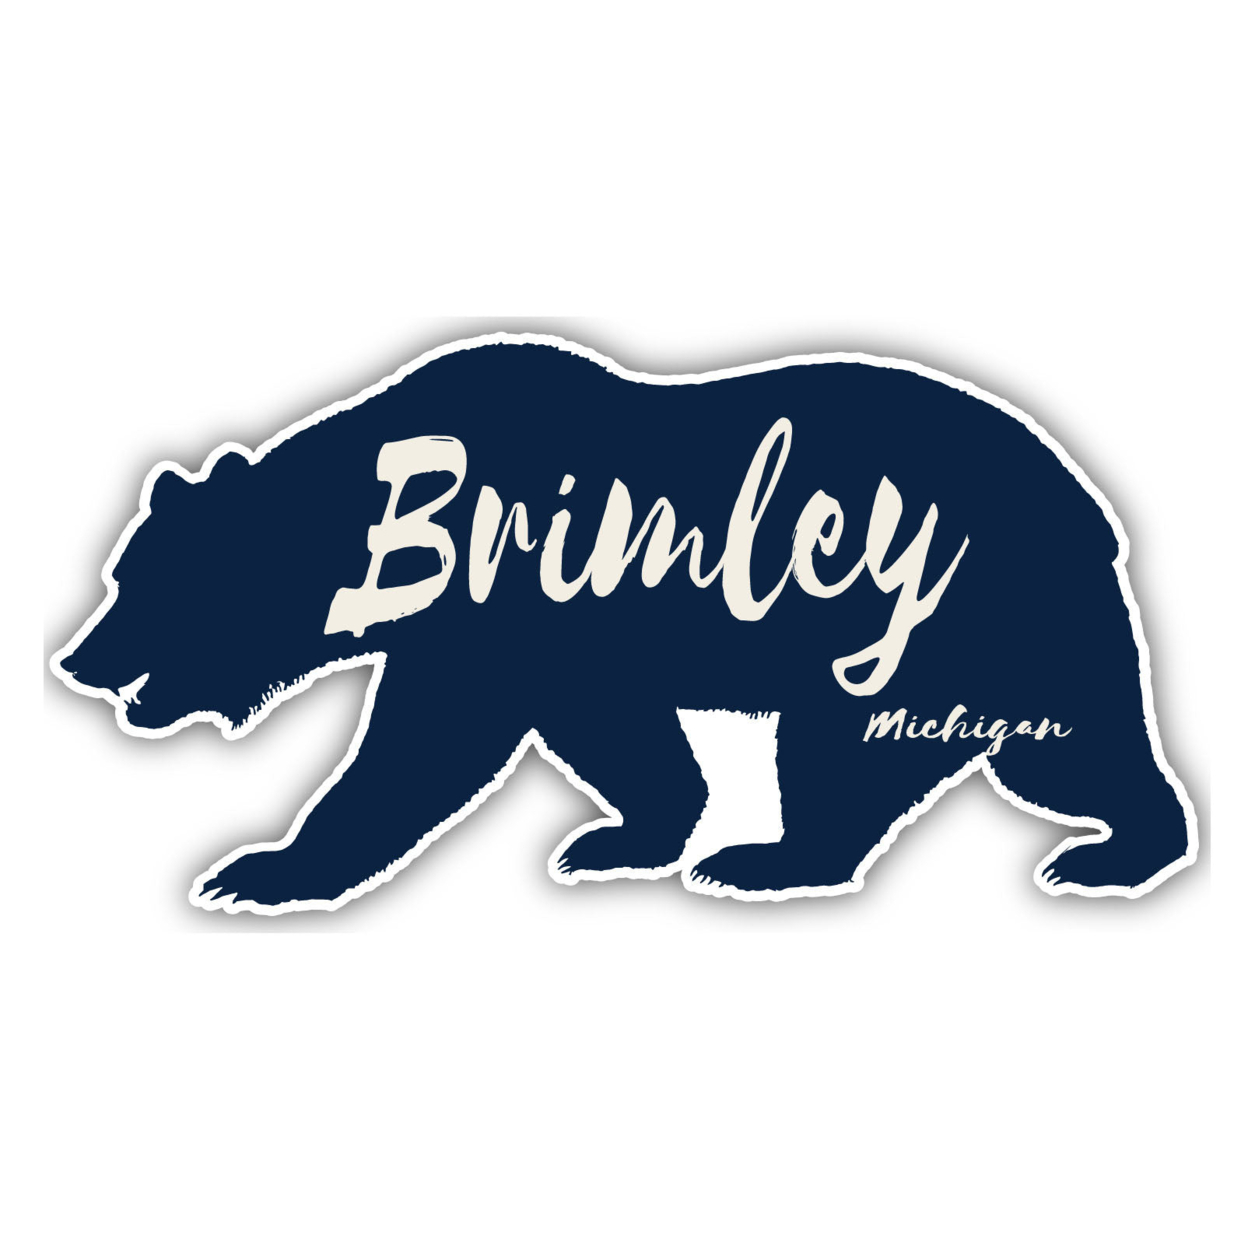 Brimley Michigan Souvenir Decorative Stickers (Choose Theme And Size) - 4-Pack, 2-Inch, Great Outdoors